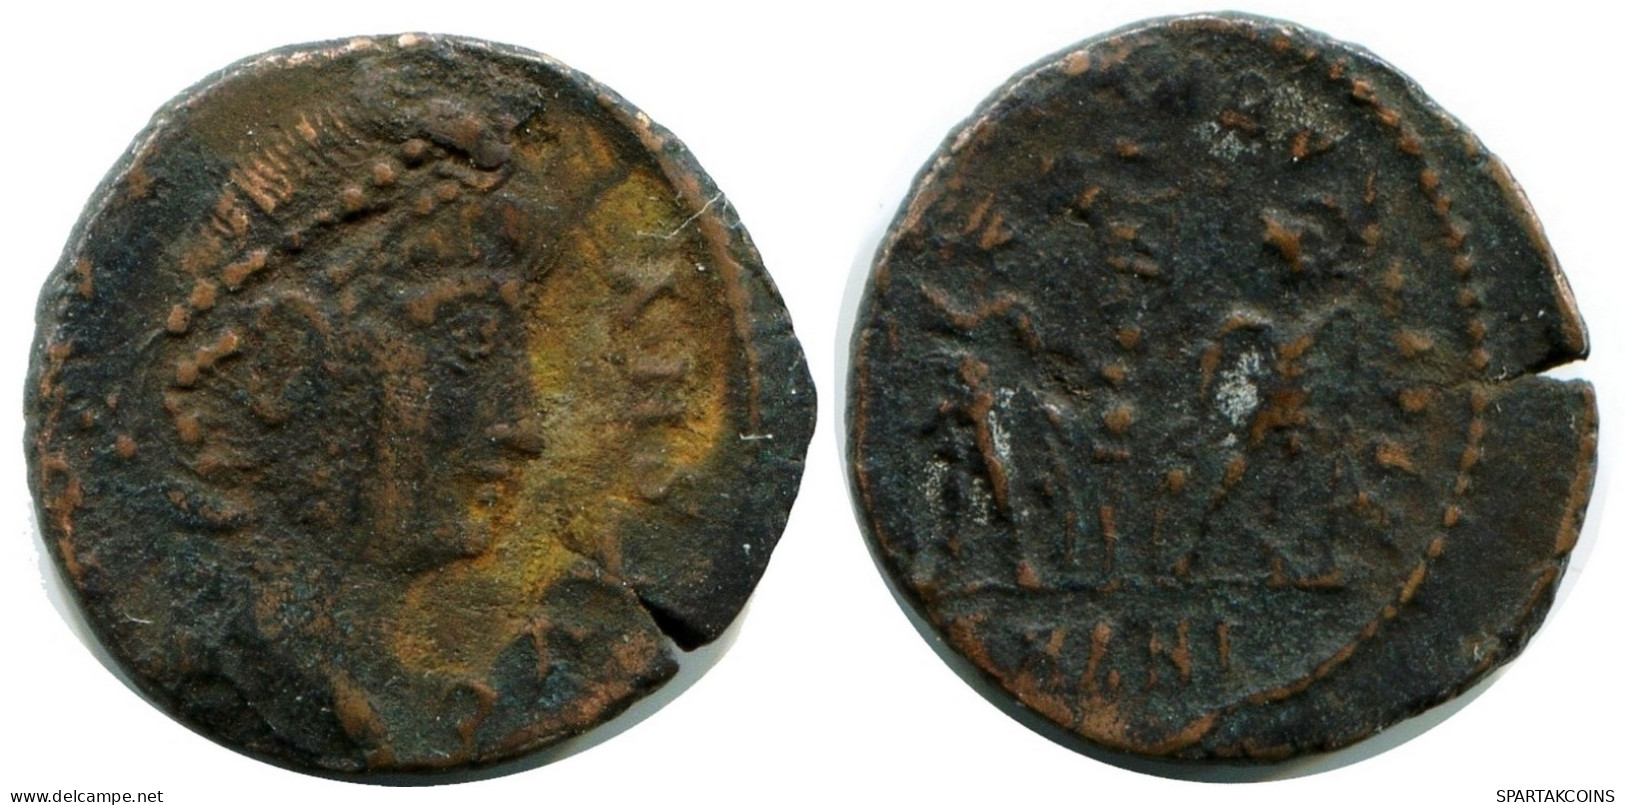 CONSTANS MINTED IN ANTIOCH FOUND IN IHNASYAH HOARD EGYPT #ANC11831.14.E.A - El Impero Christiano (307 / 363)